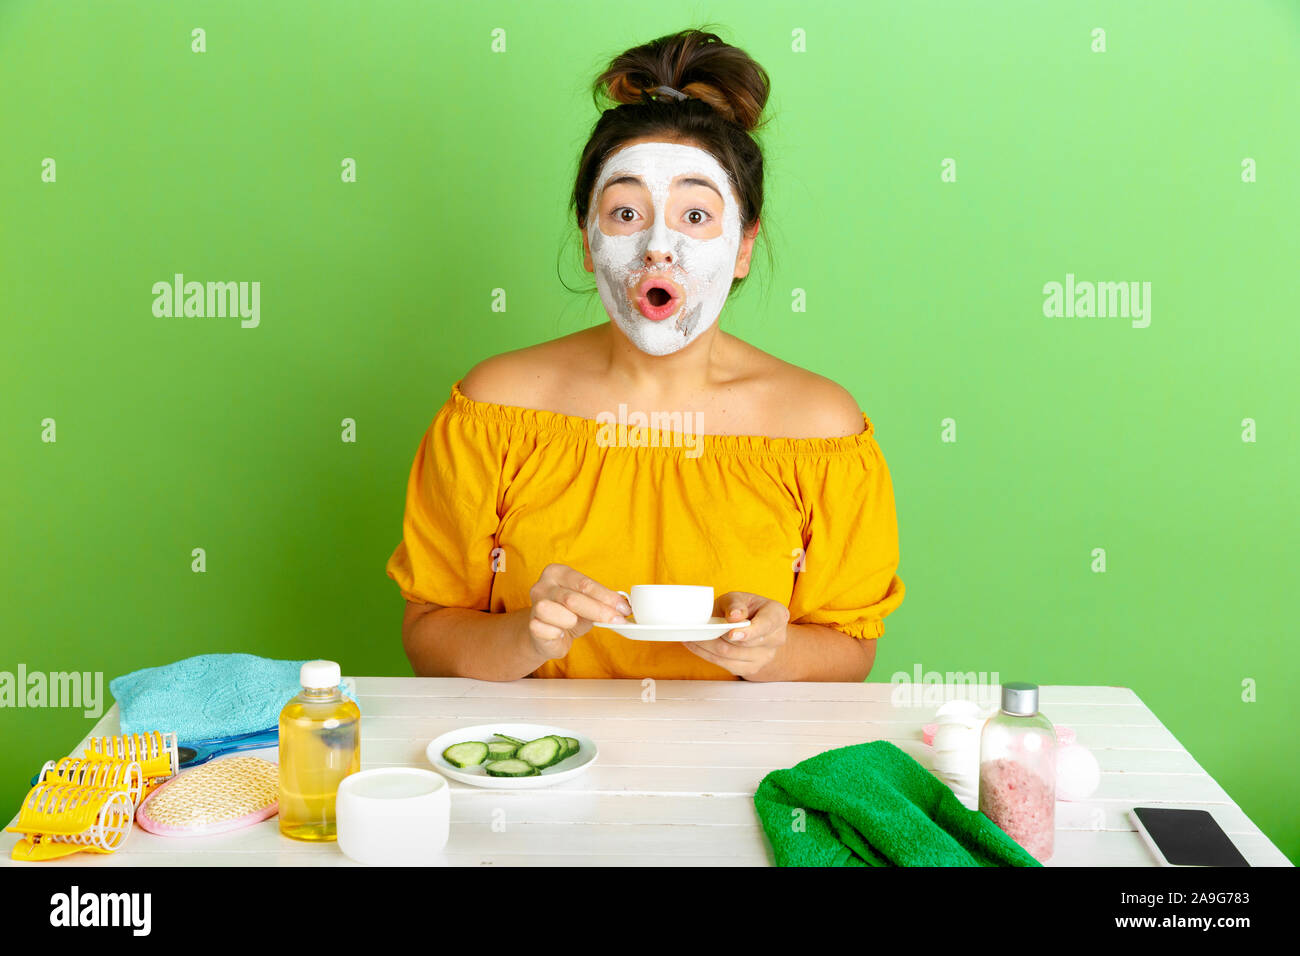 Portrait of young caucasian woman in beauty day, skin and hair care routine. Female model drinking coffee, tea while applying facial mask. Astonished. Selfcare, natural beauty and cosmetics concept. Stock Photo